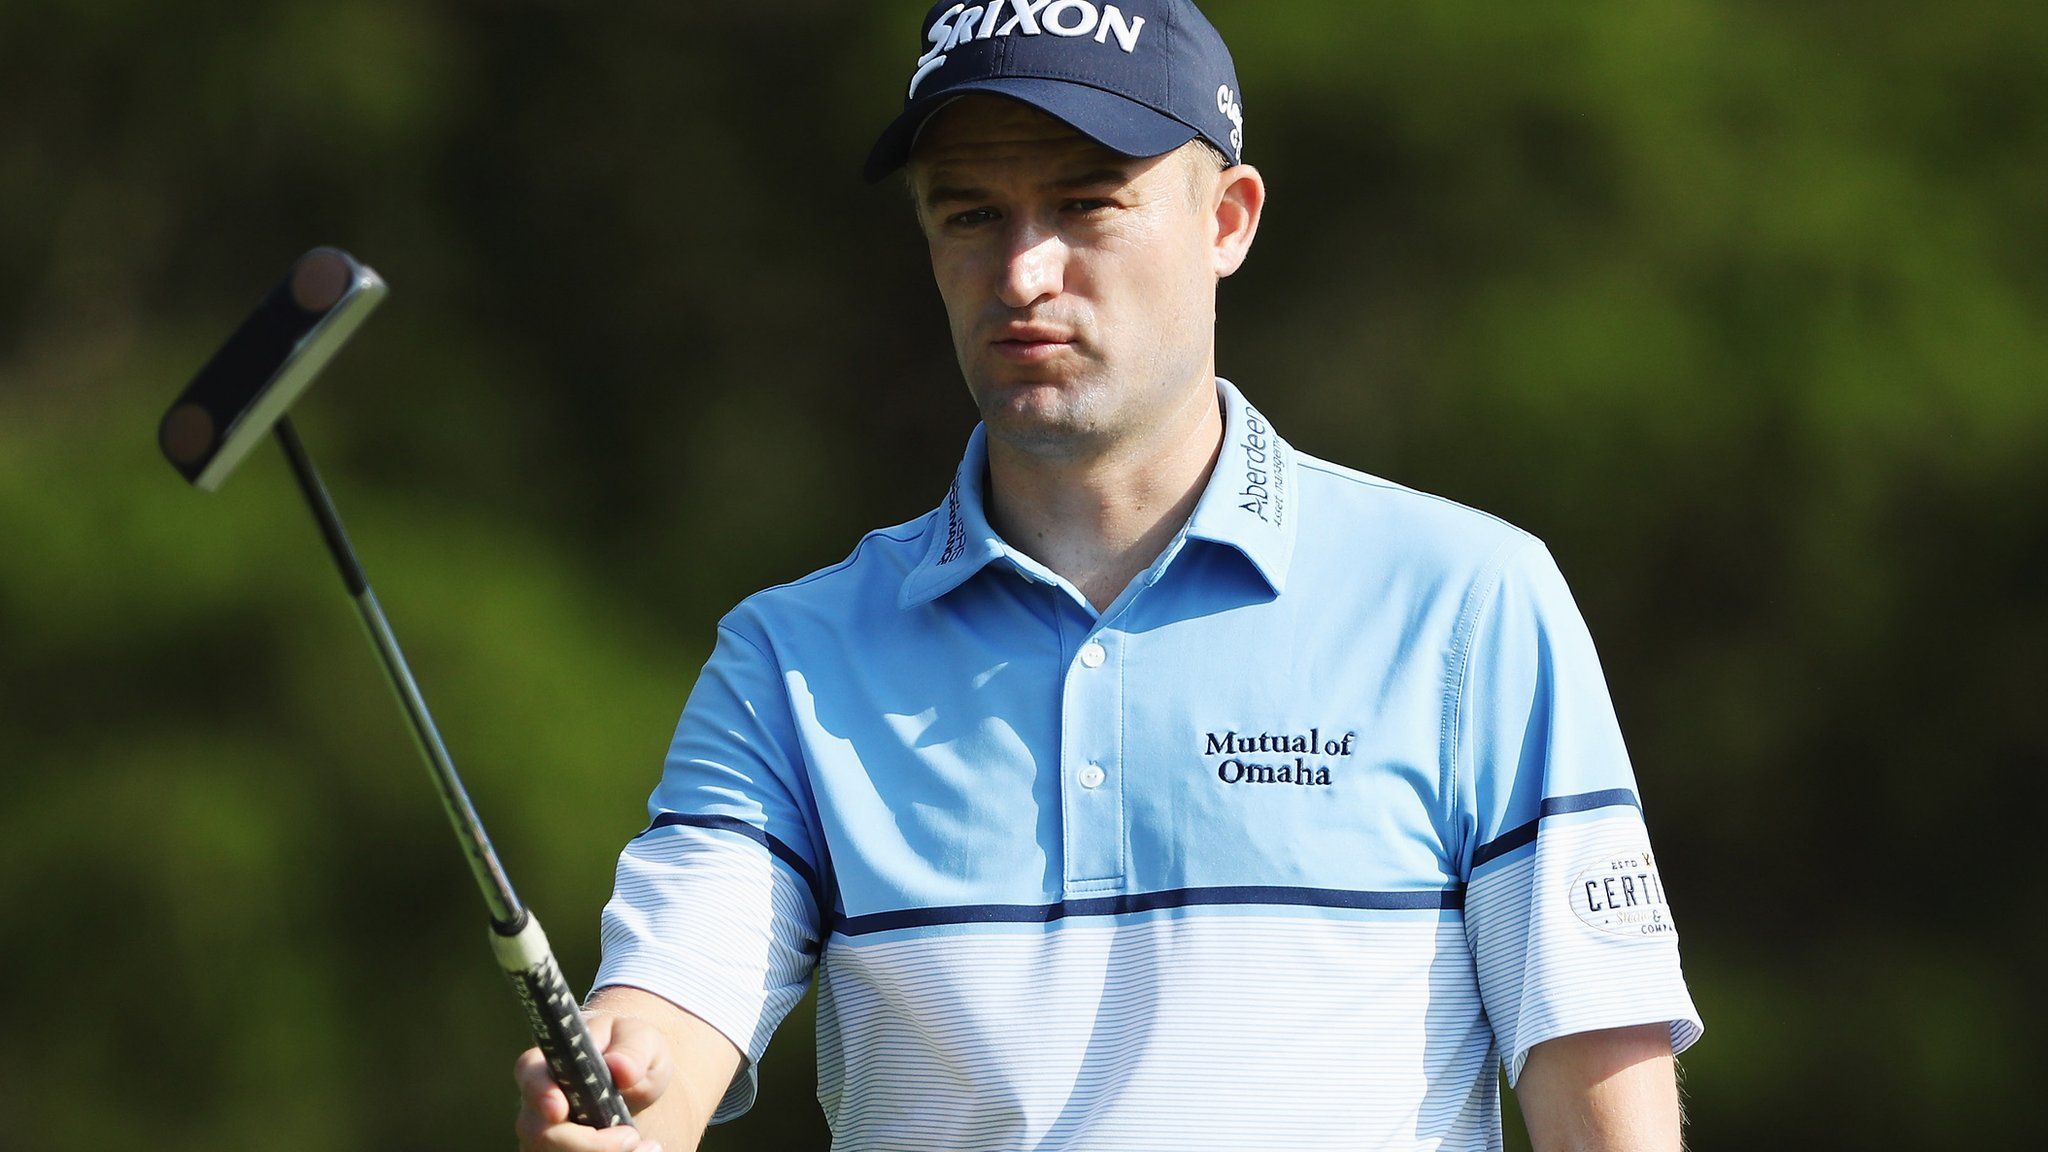 Russell Knox reflects on a missed putt at The Barclays tournament